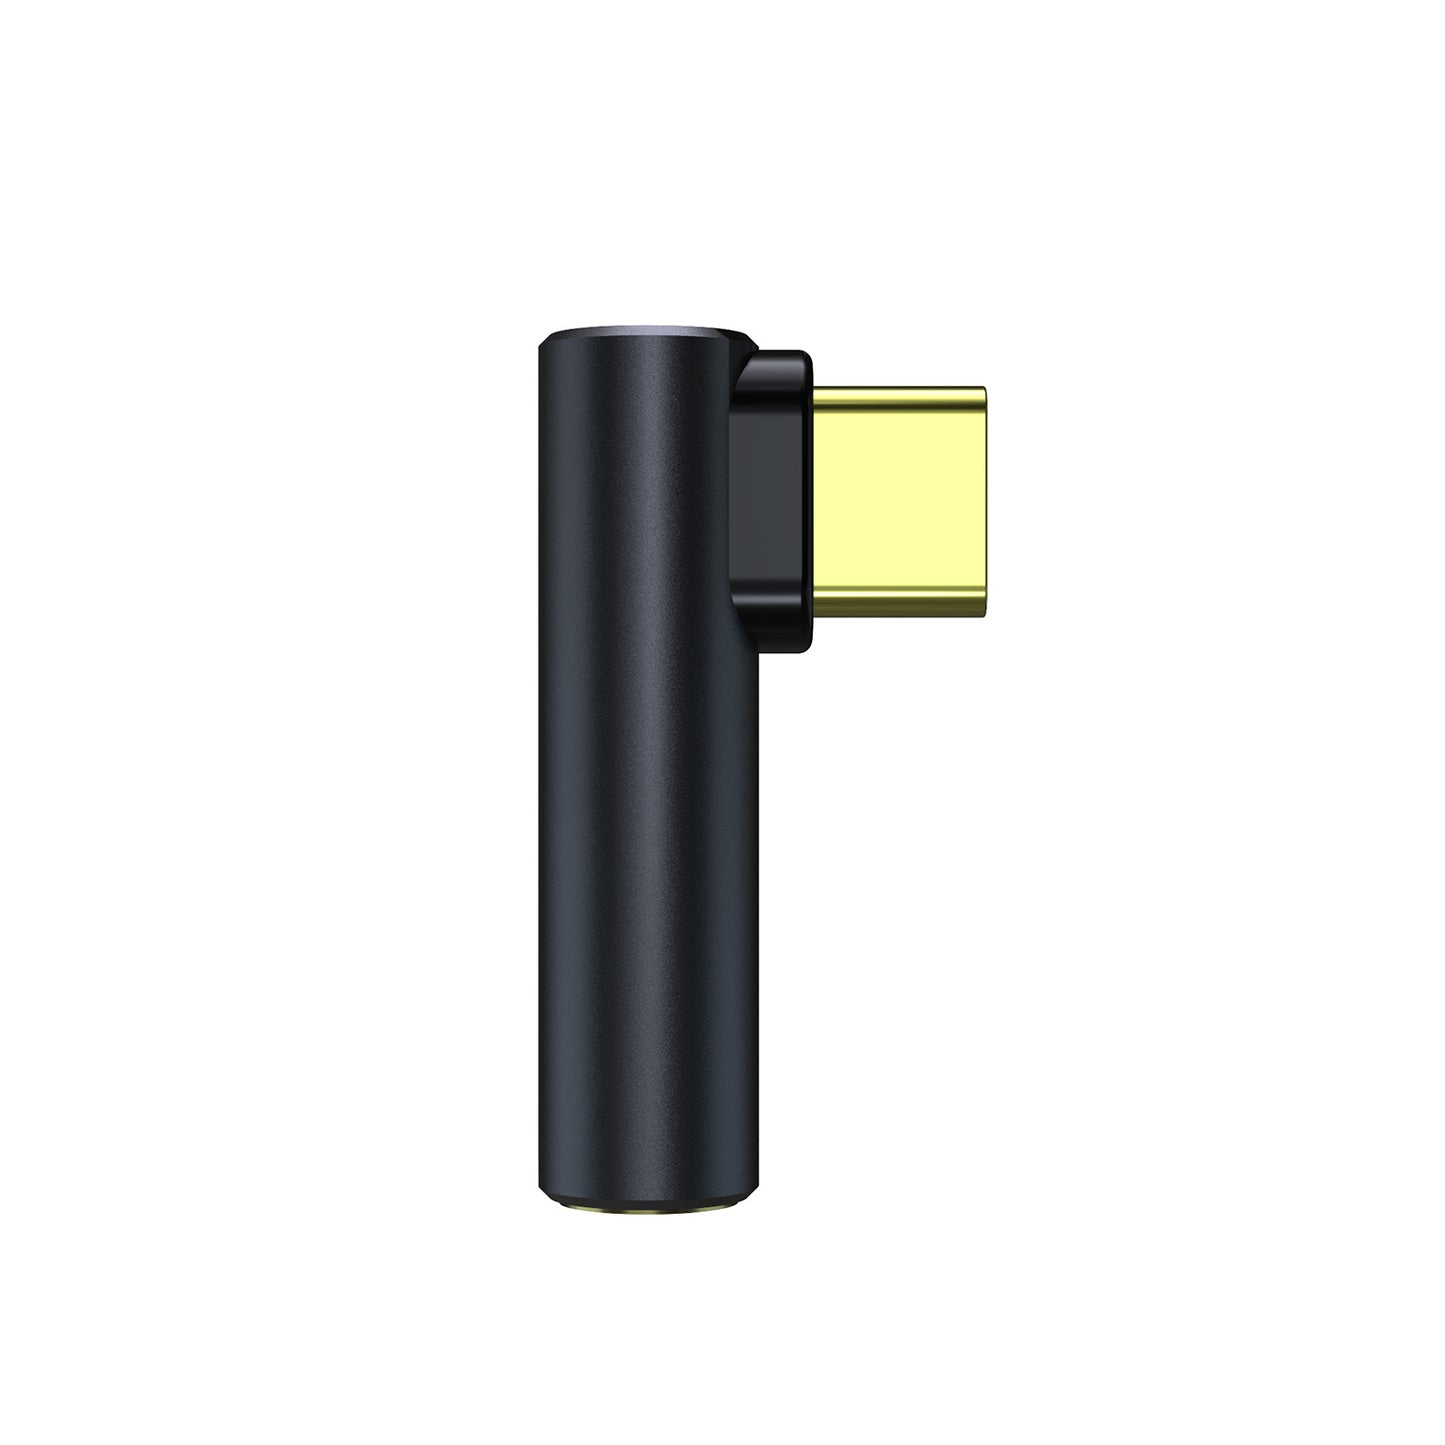 Headphone Adapter Type-c To 3.5mm Audio Adapter USB-c Small And Exquisite Universal TypeC Mobile Phone